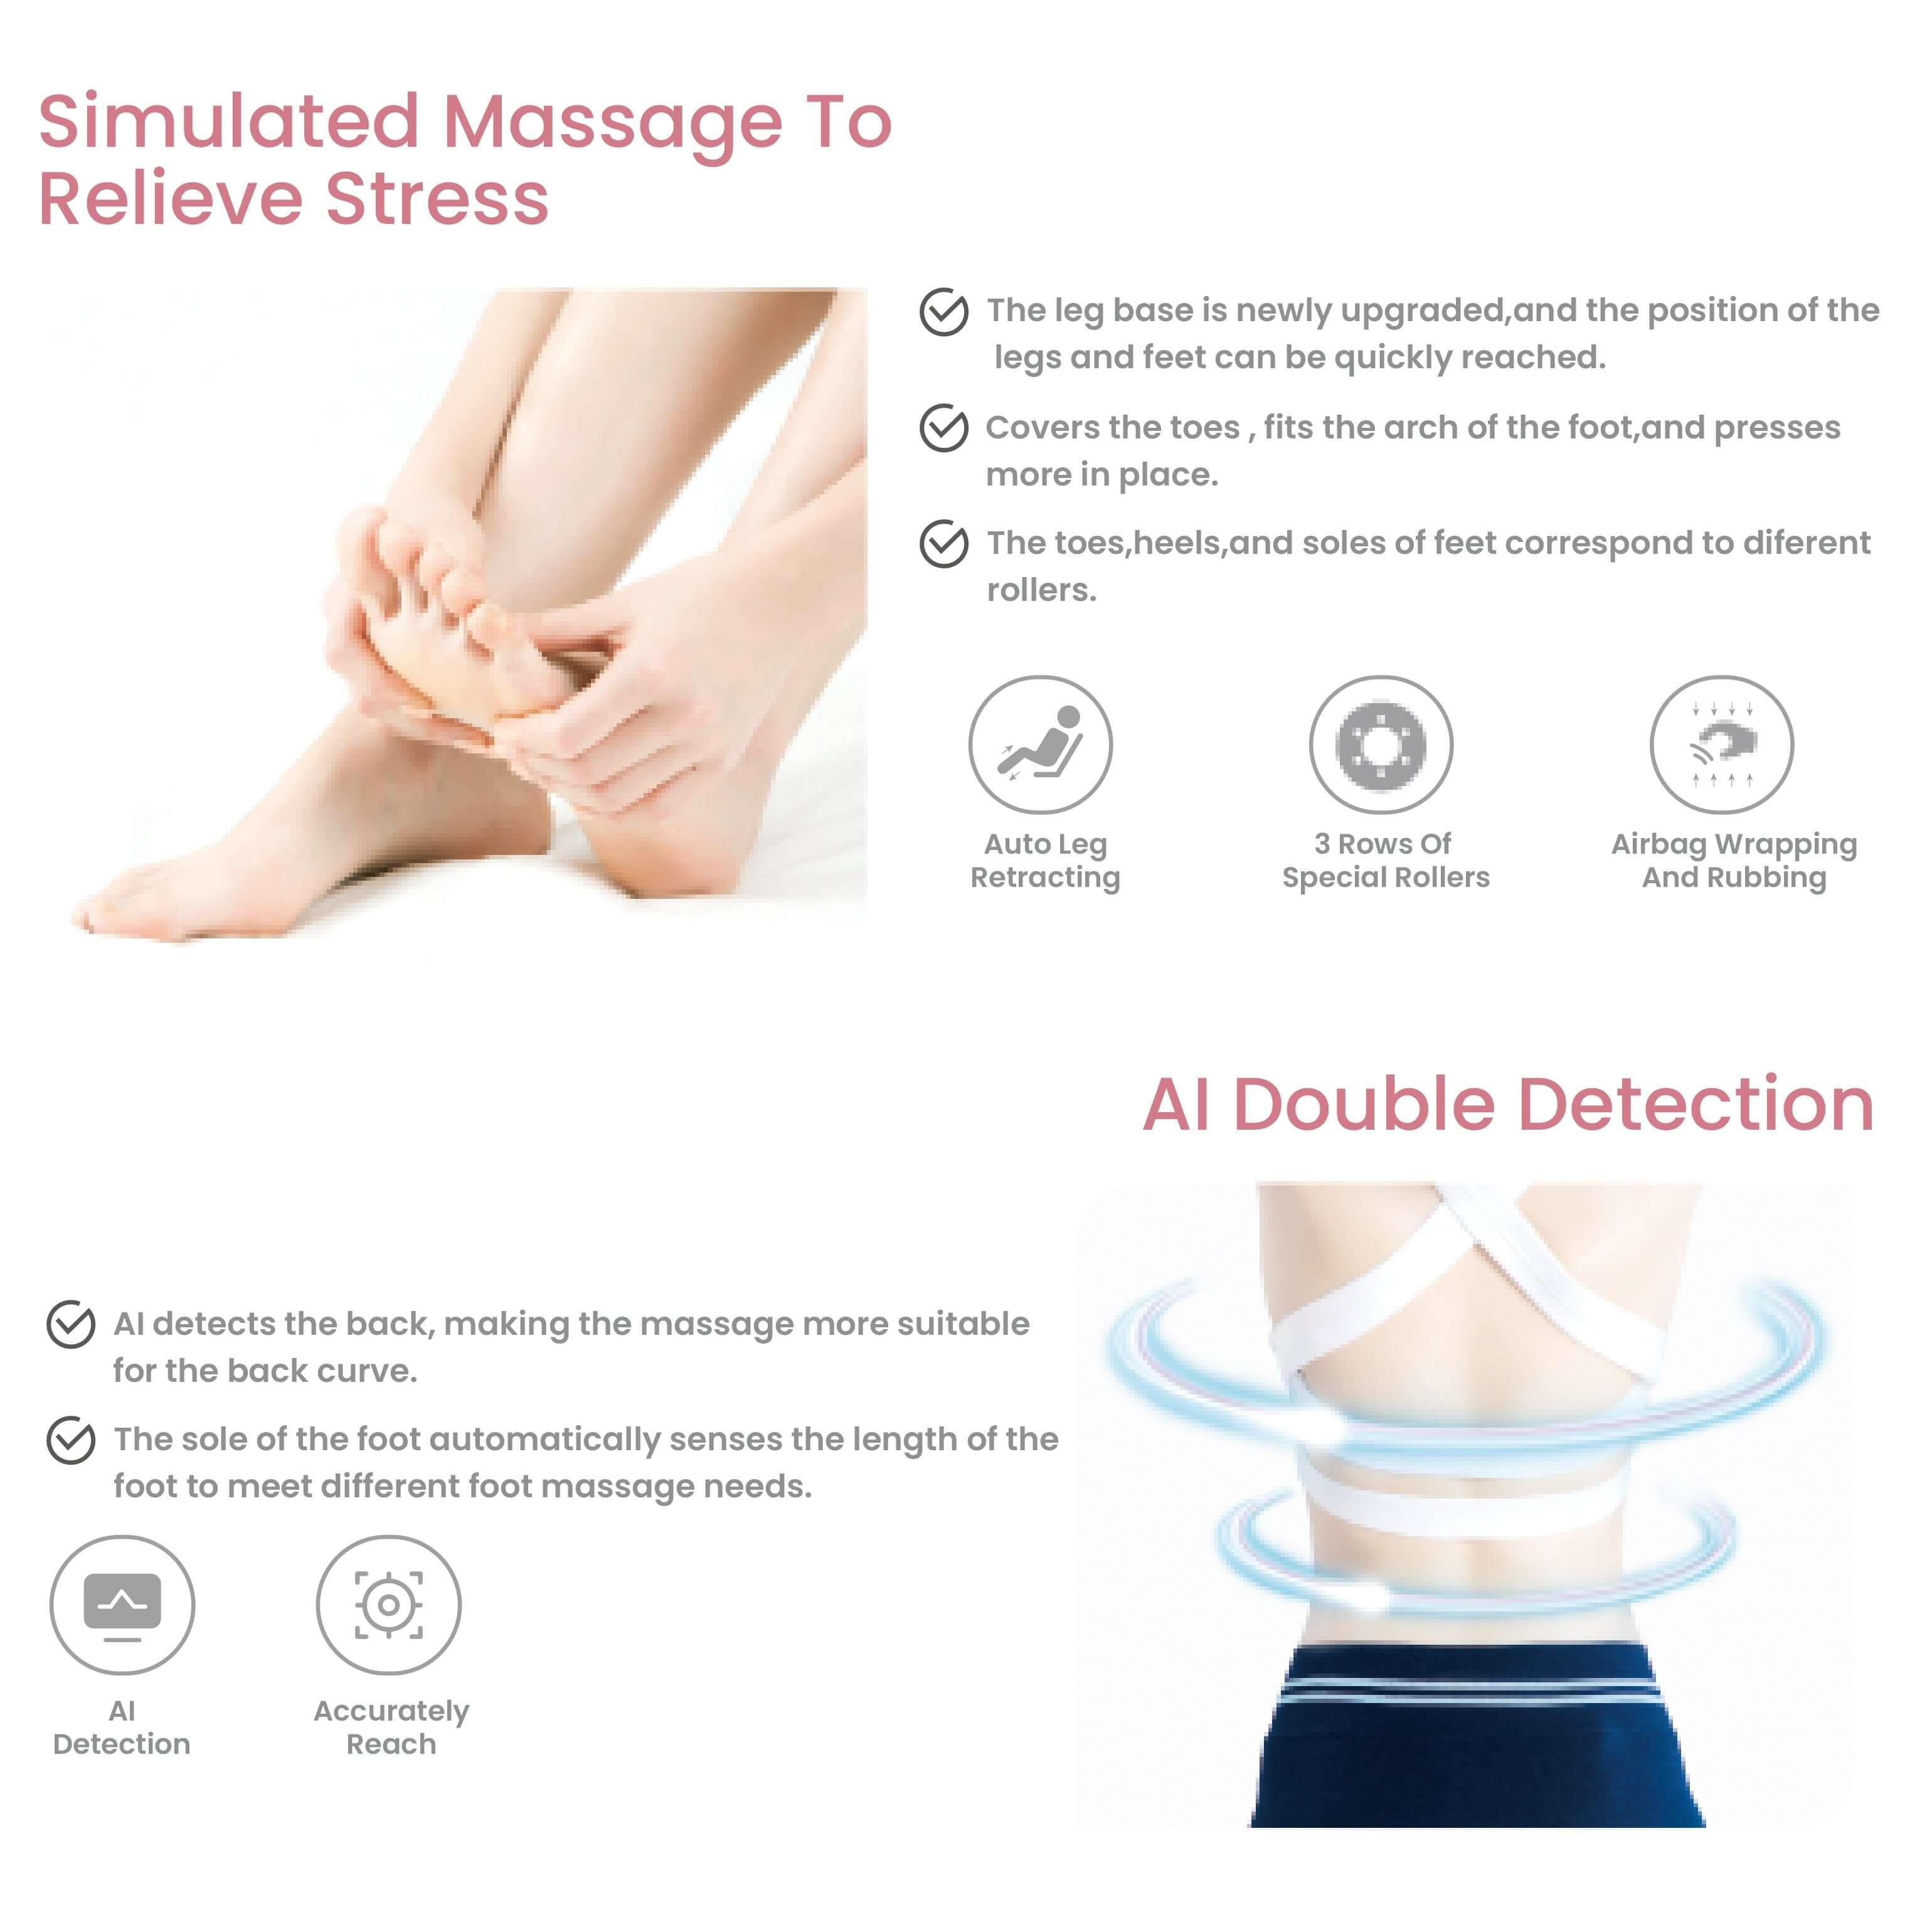 Simulated massage to relieve stress with foot and back AI double detection for massage chairs in UAE, Dubai. best massage chair uae, massage chair Dubai, massage chair uae, massage chair Saudi Arabia, كرسي التدليك, Best massage chair in Dubai UAE, buy mas